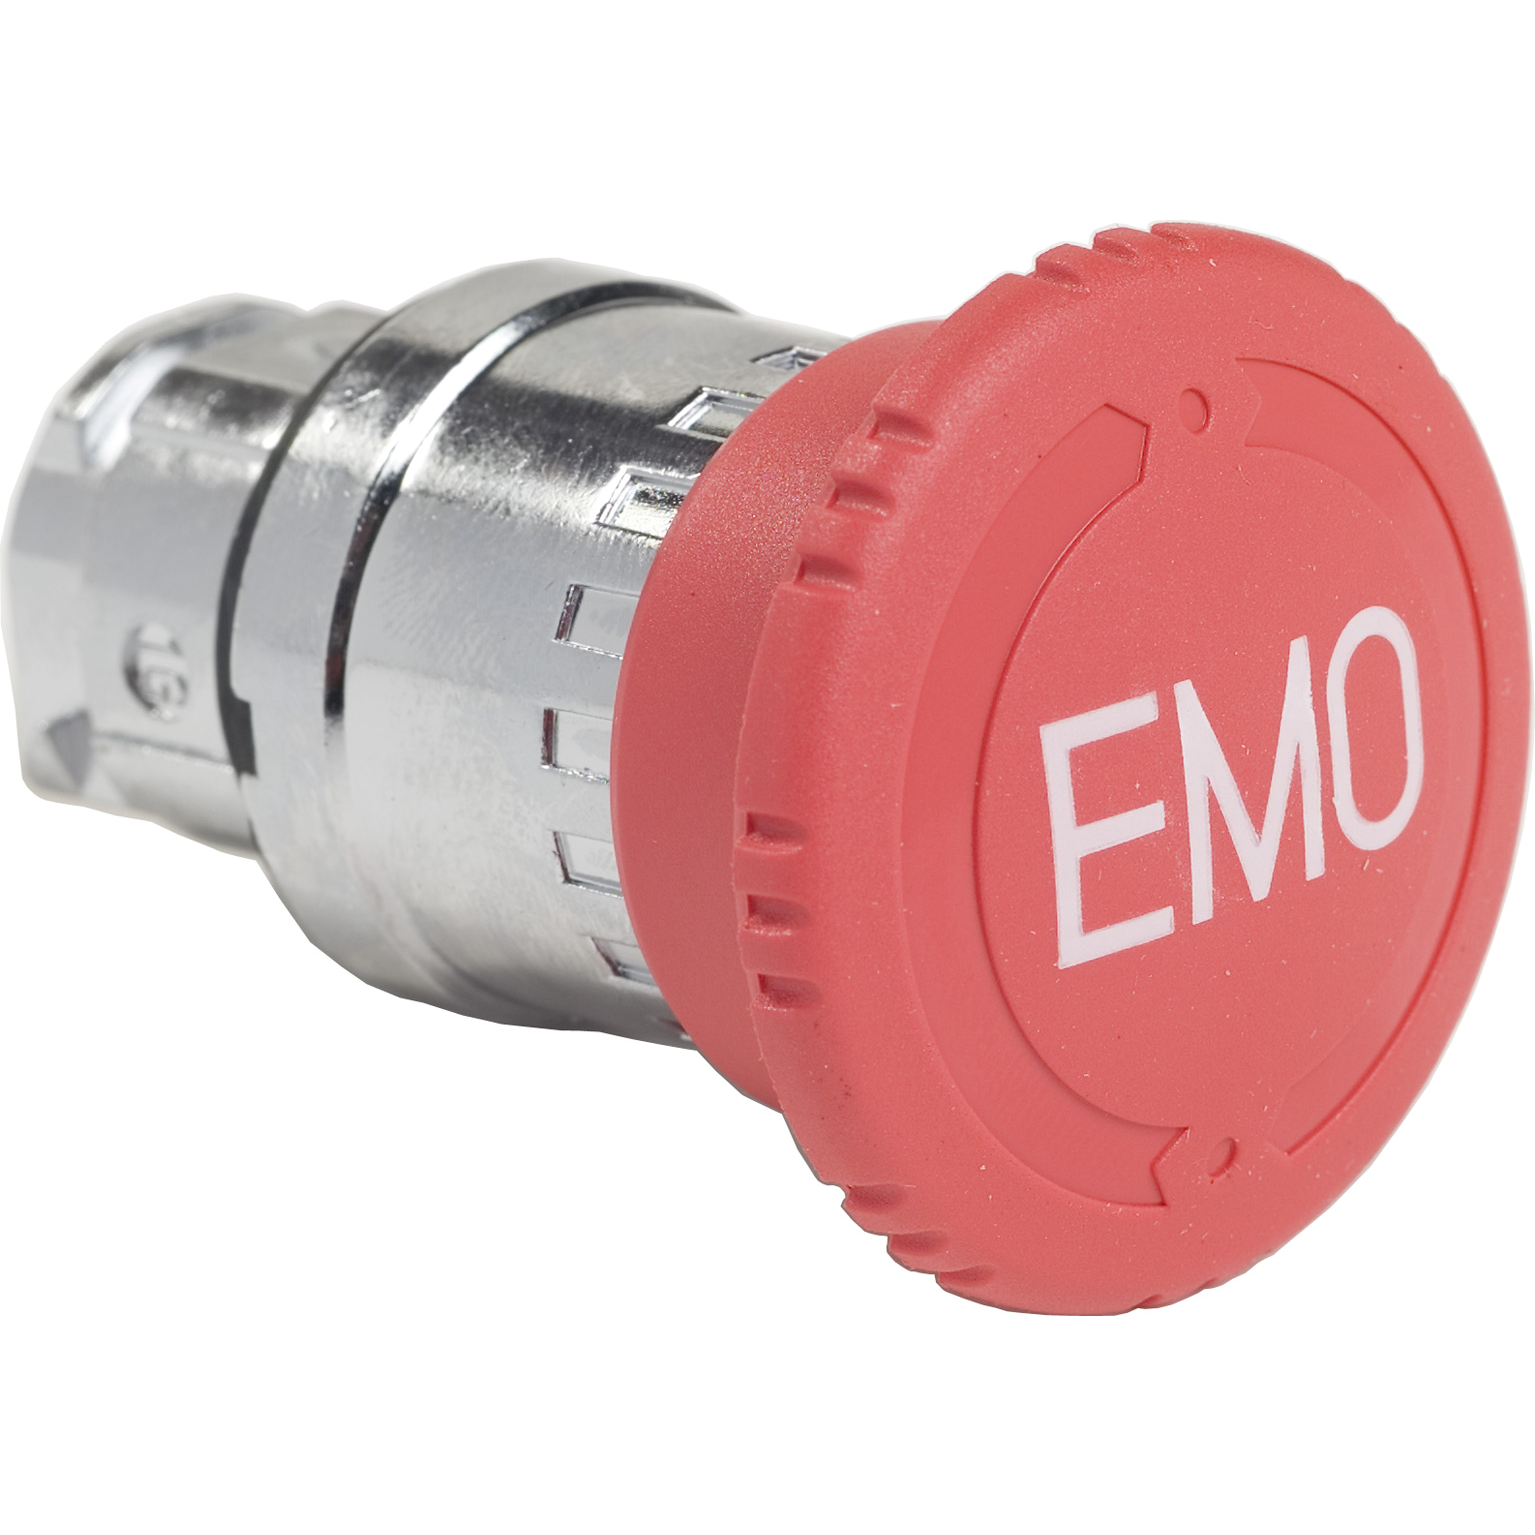 Emergency stop head, Harmony XB4, switching off, metal, red mushroom 40mm, 22mm, trigger latching turn to release, marked EMO